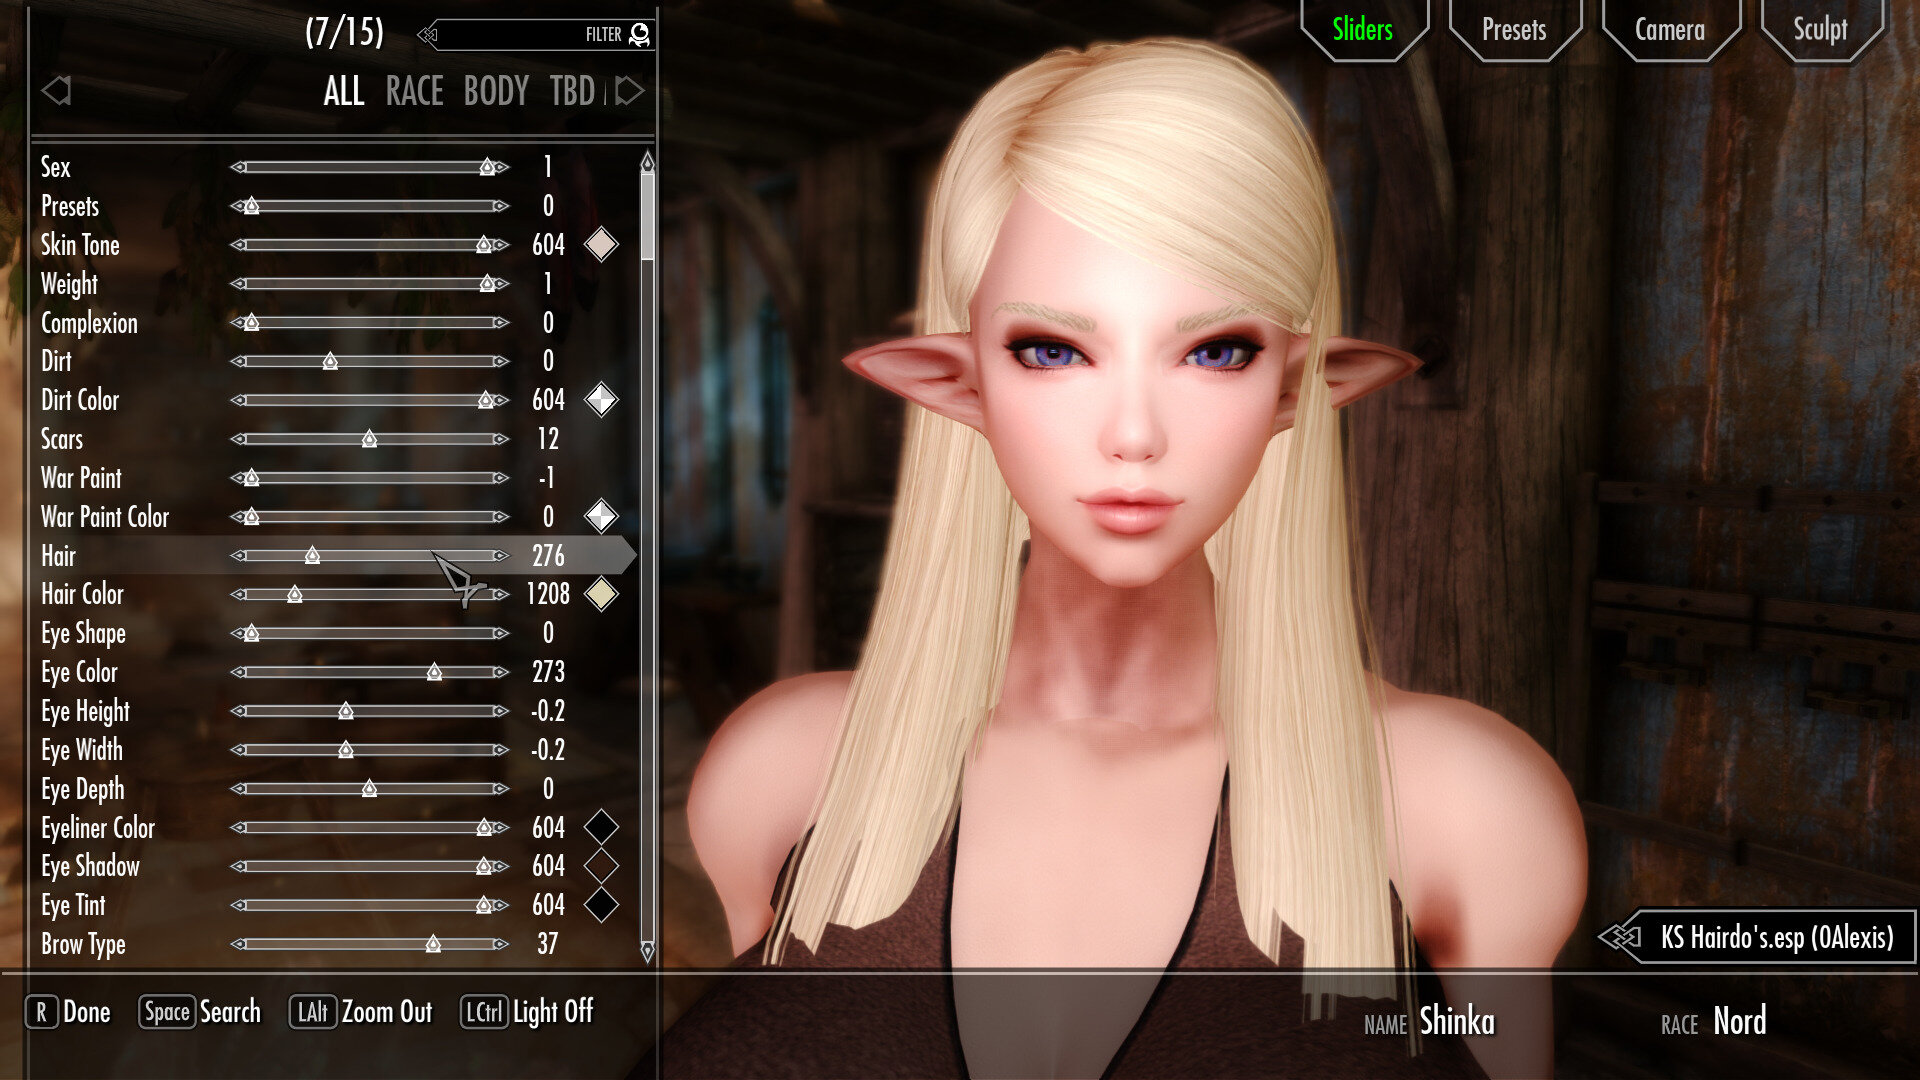 sEARCH] daedric pei Hair mod search - Request & Find - Skyrim Non Adult Mods  - LoversLab